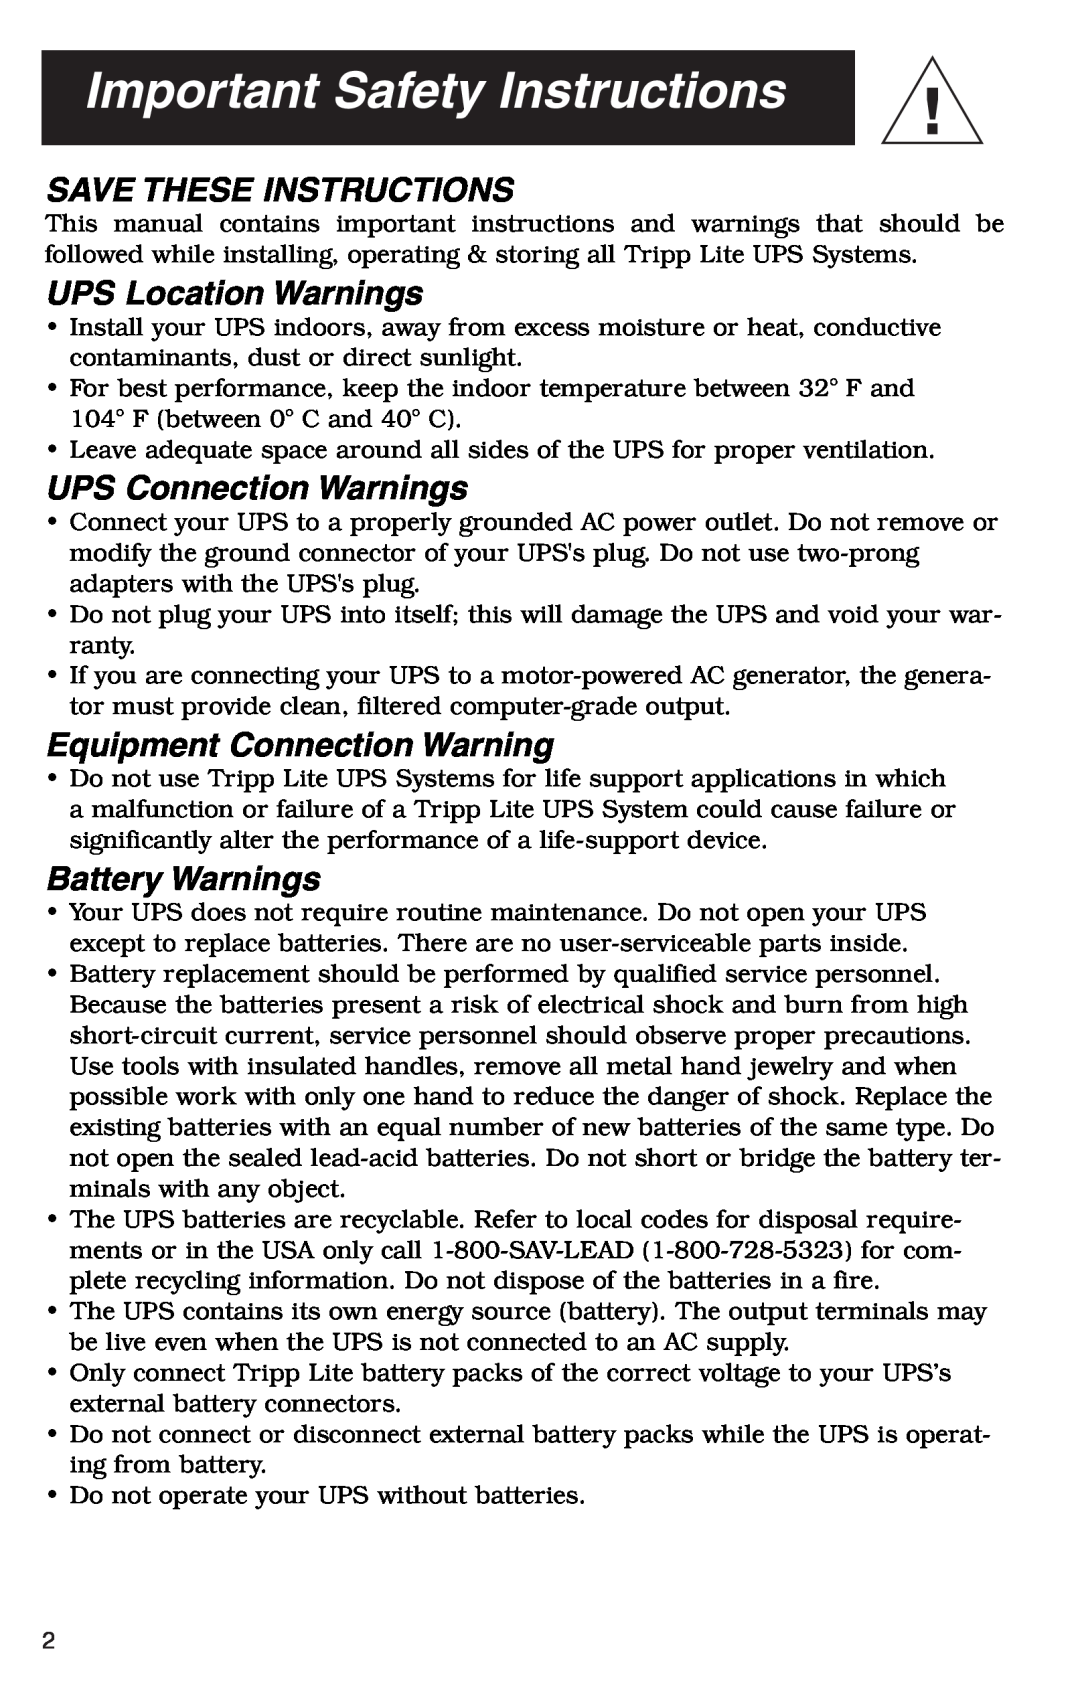 Tripp Lite SU1000RT2UHV Important Safety Instructions, Save These Instructions, UPS Location Warnings, Battery Warnings 